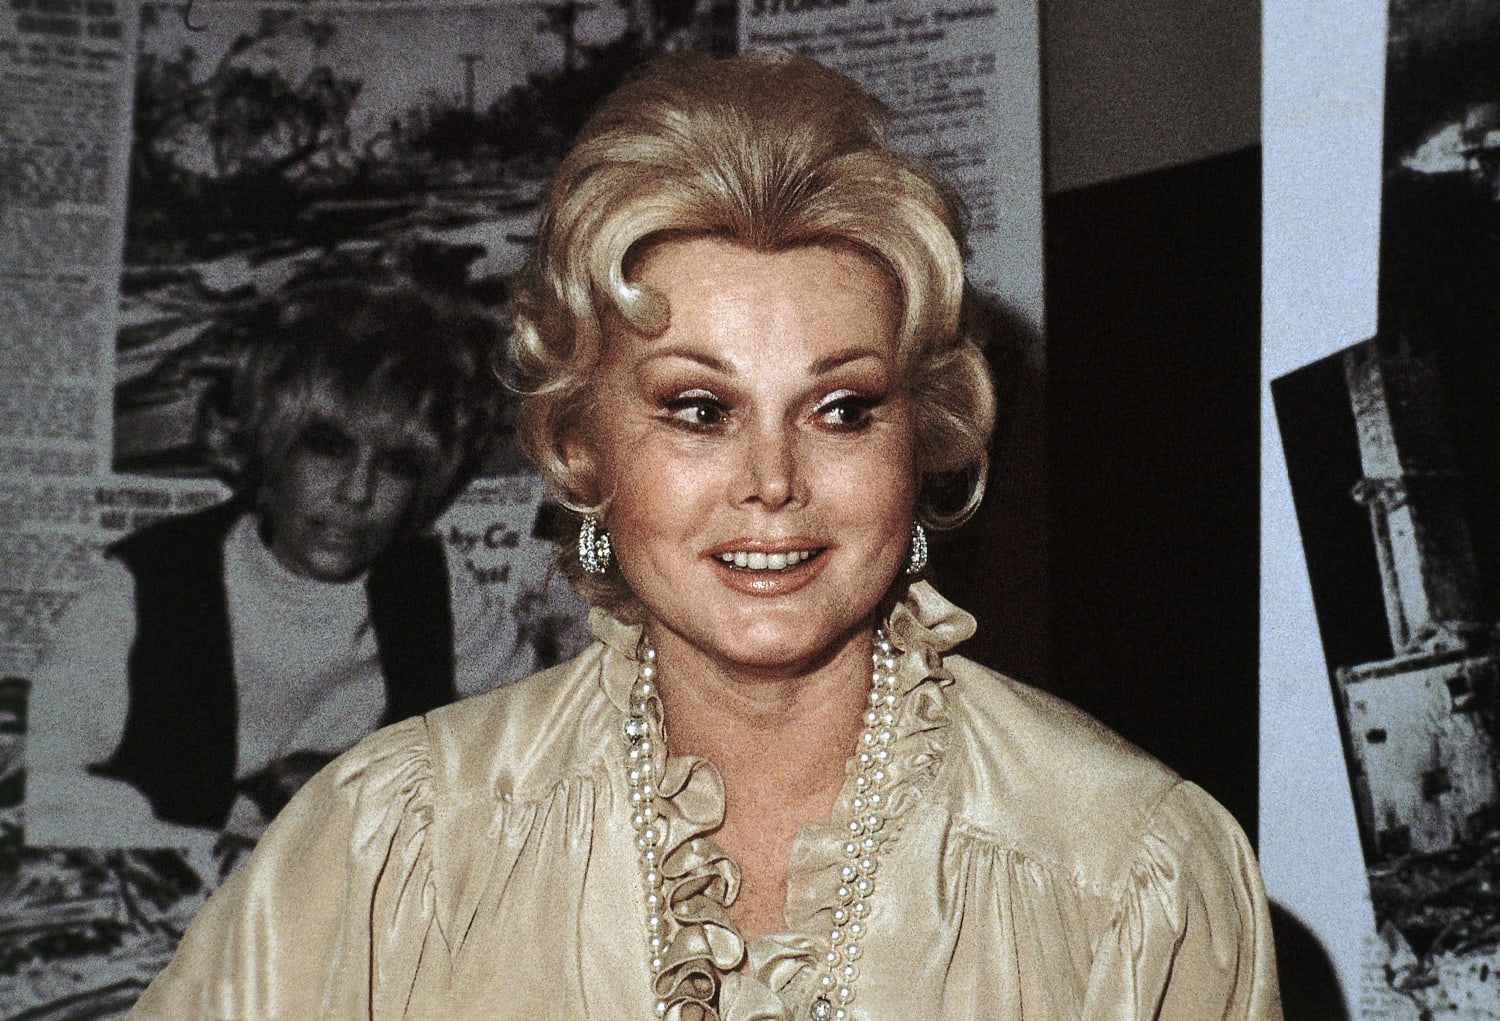 Zsa Zsa Gabor, actress, socialite and Hollywood icon, dies aged 99